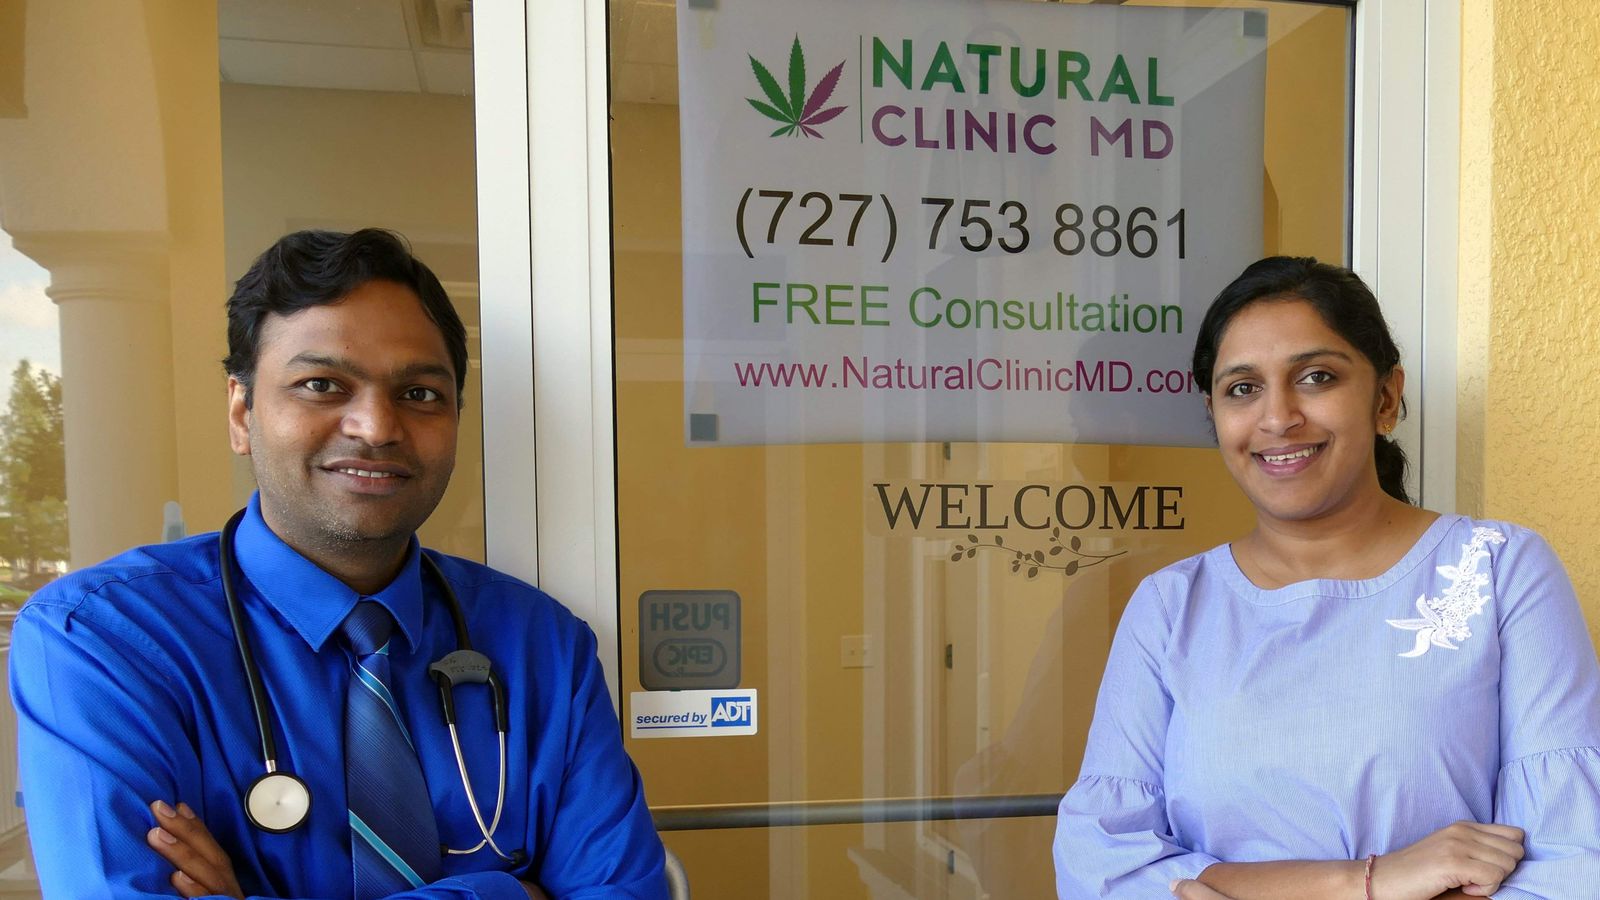 A budding business: Pasco doctors devote practices to medical marijuana